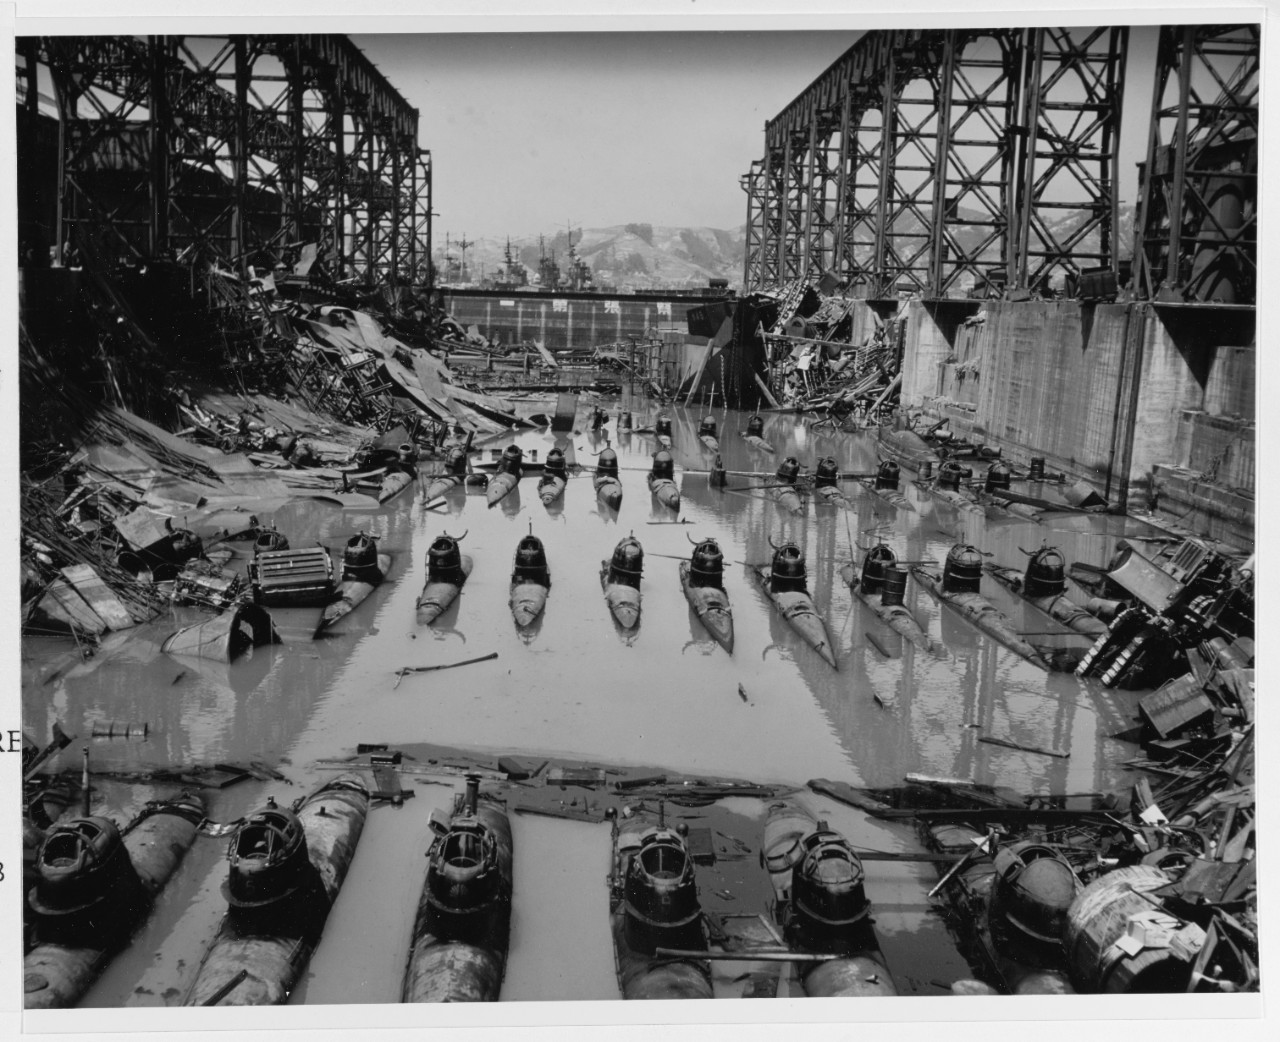 Photo of Japanese midget submarines in a dry dock. 